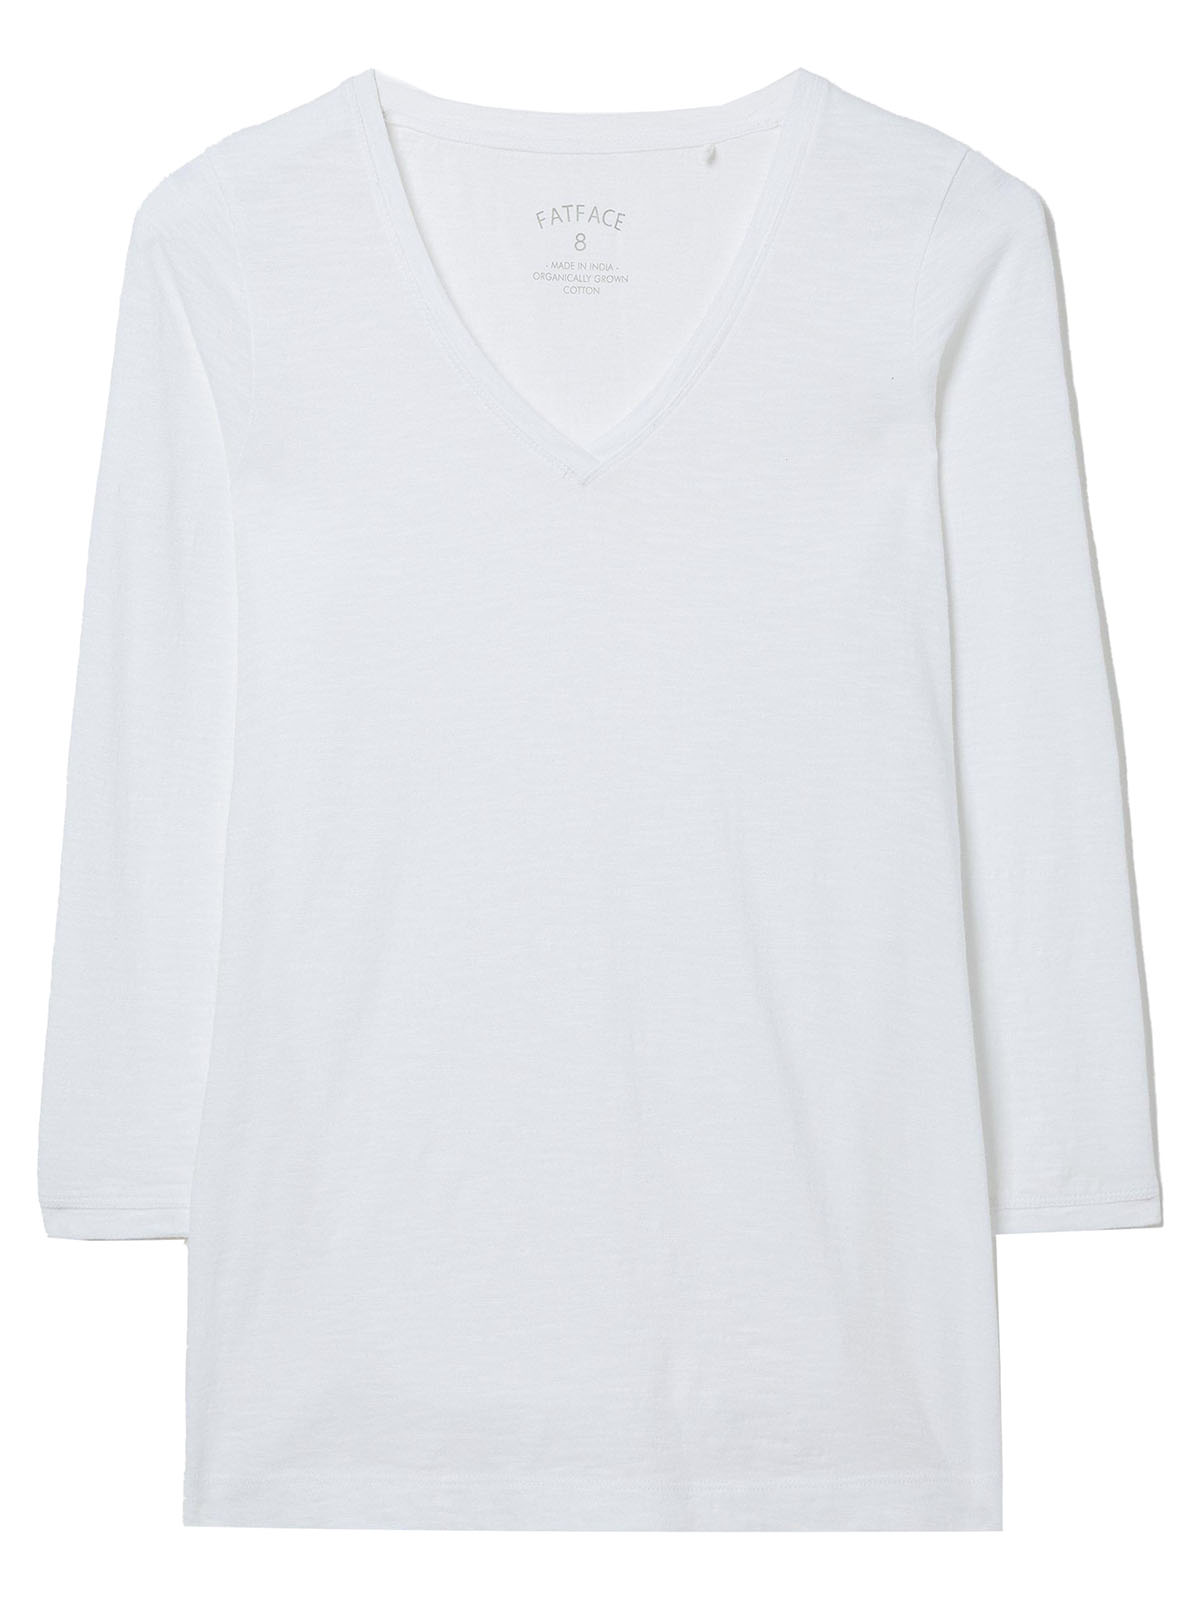 FAT FACE - - Fat Face WHITE Pure Cotton KEMI 3Q Sleeve Top - Size 8 to 18